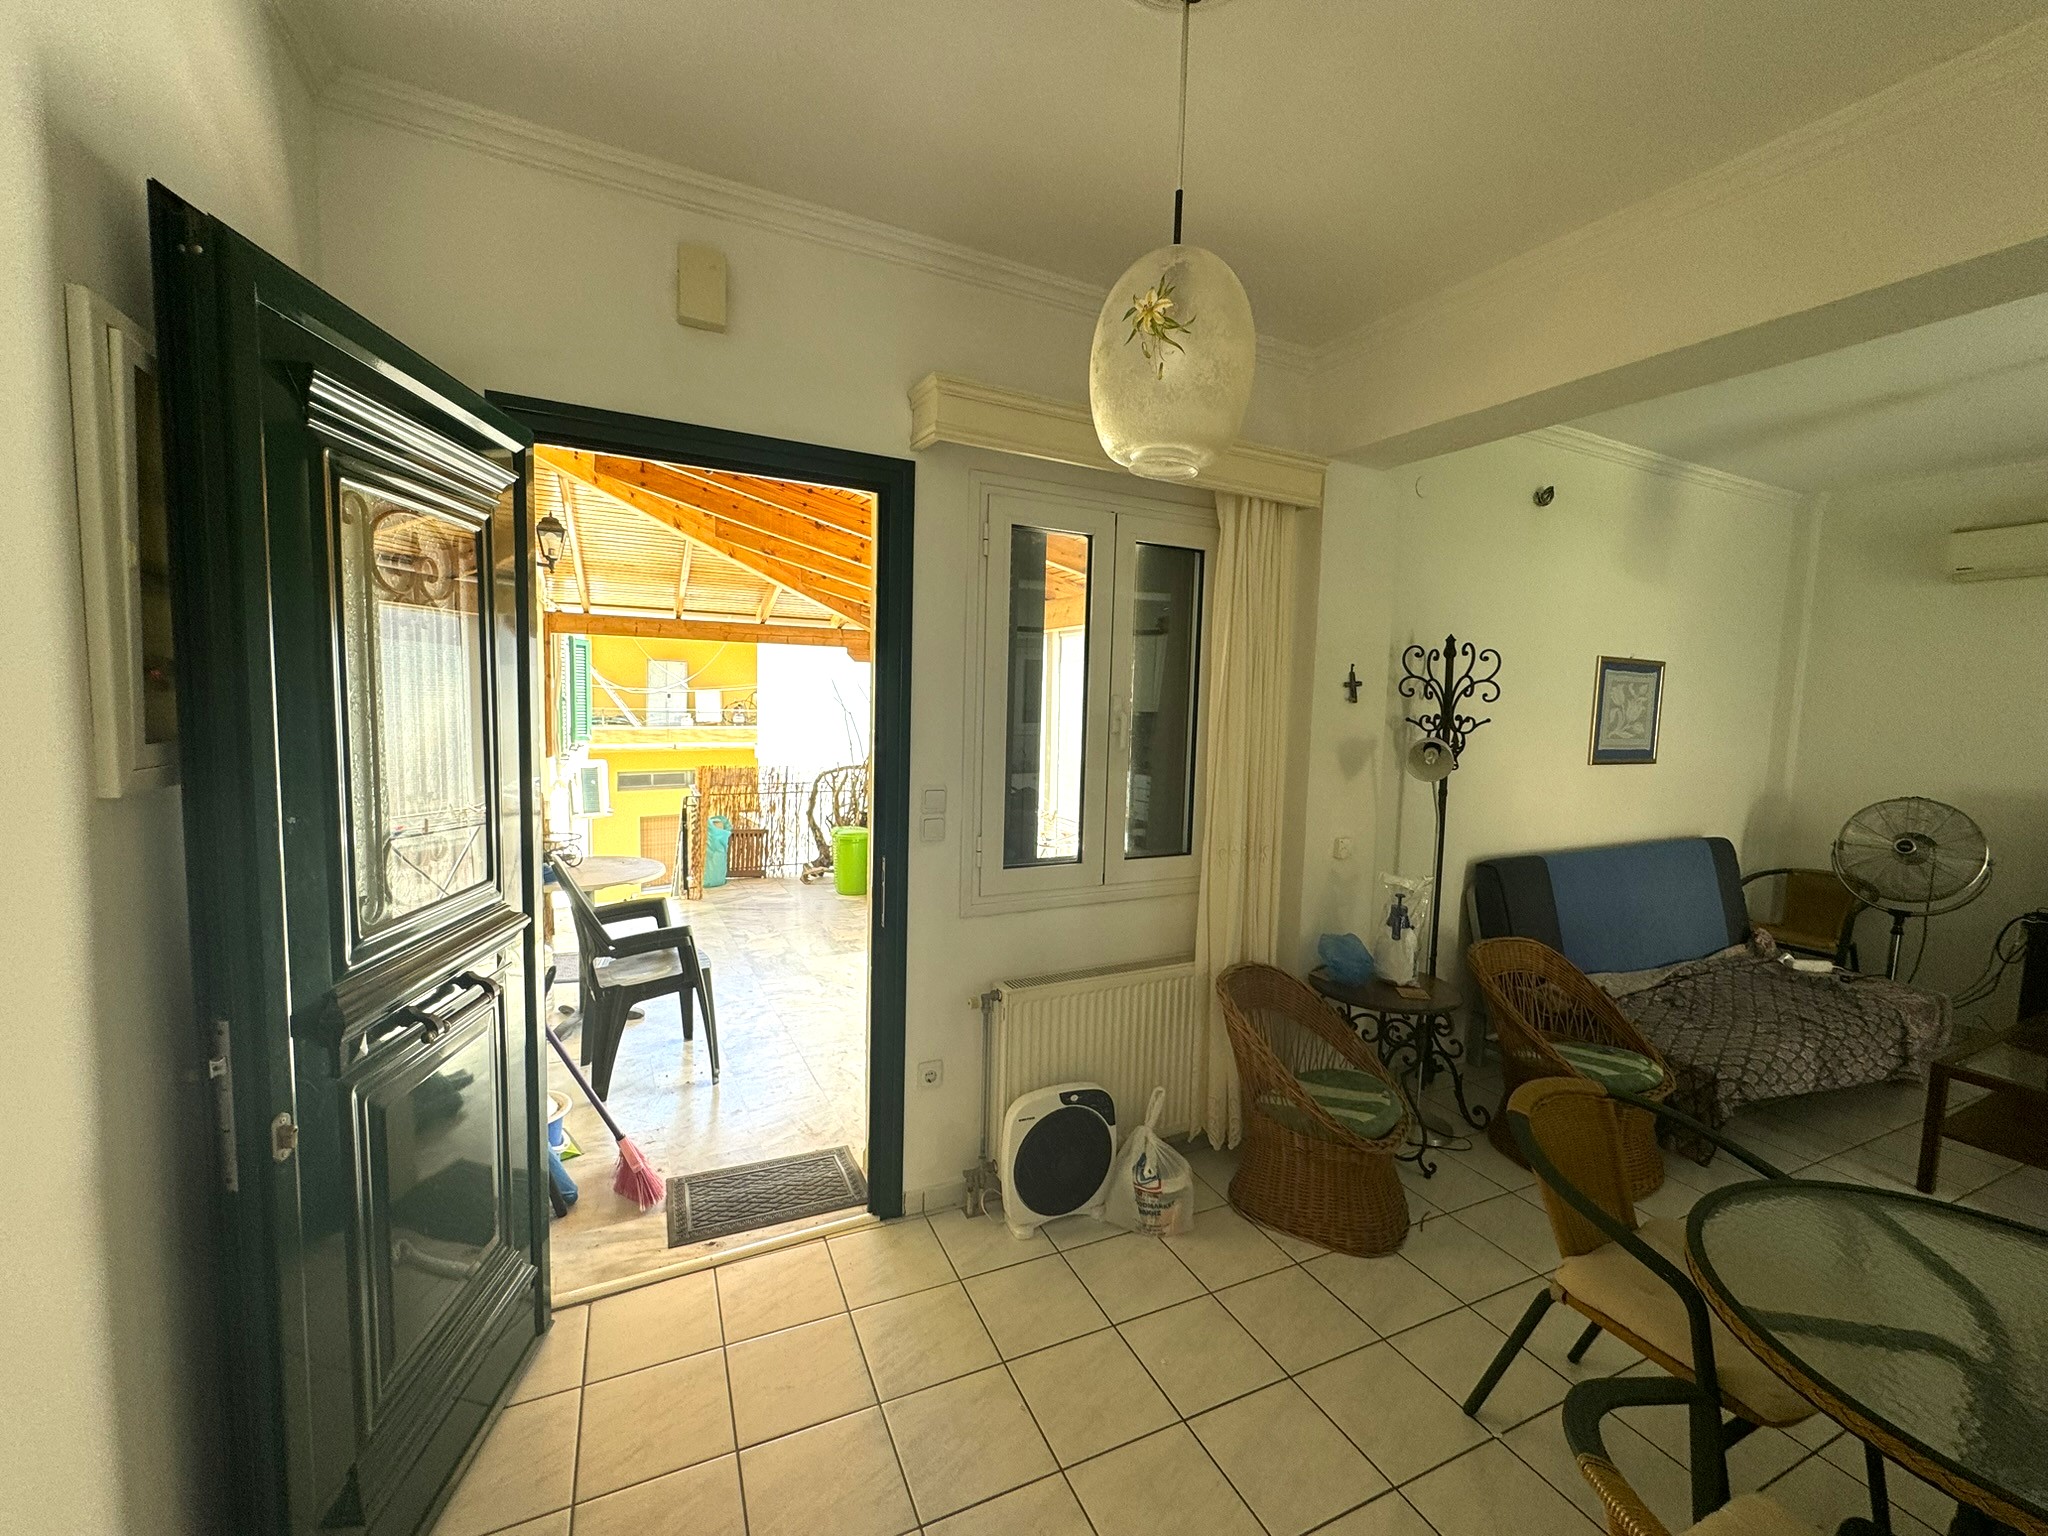 Lounge and front door of house for sale in Ithaca Greece Vathi